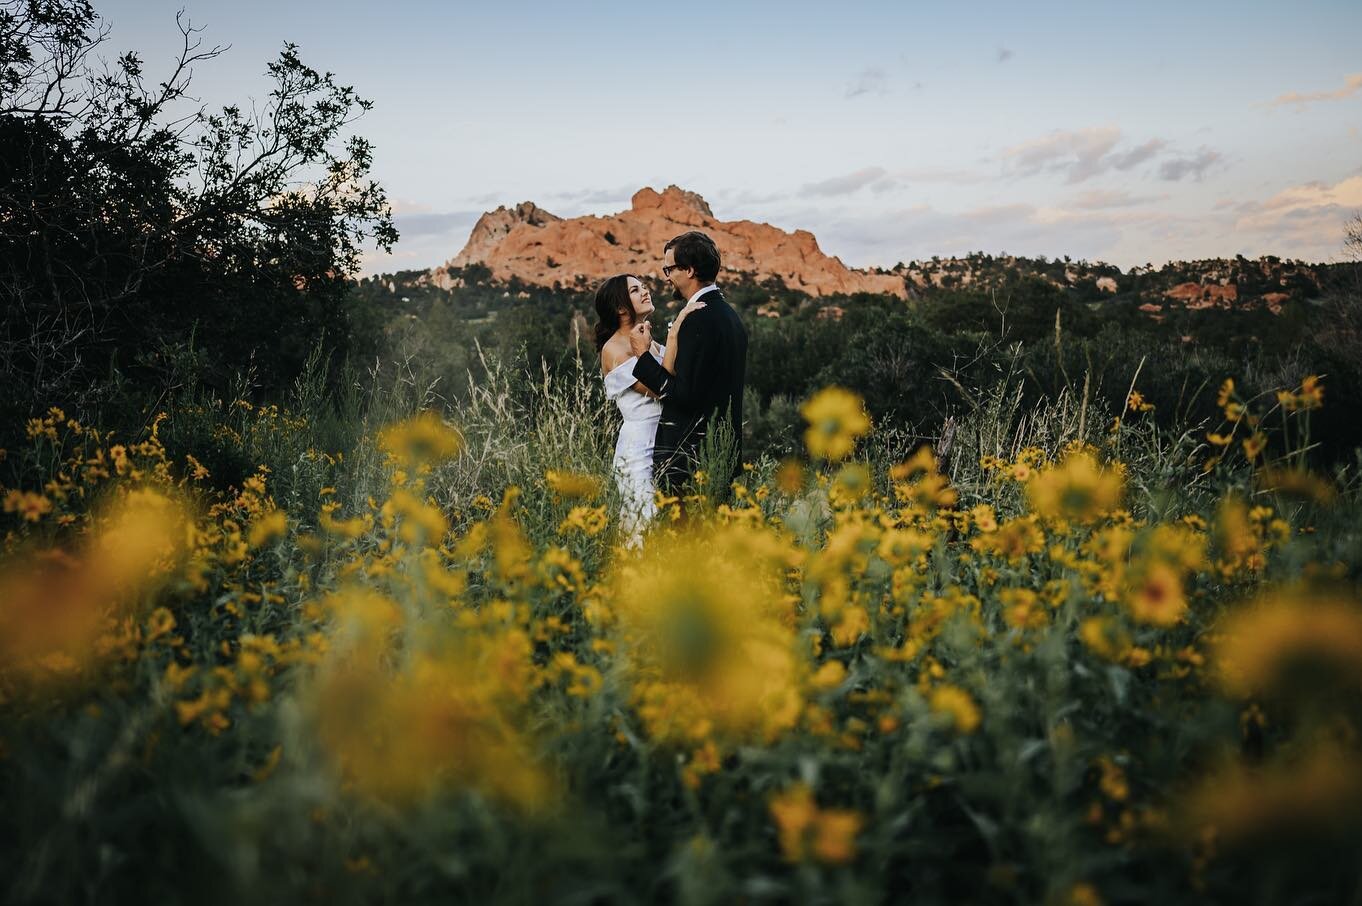 When the flowers are poppin, they&rsquo;re poppin. Congratulations to these two lovelies. You deserve so much love, friends!

#coloradoelopement #coloradoelopementphotographer